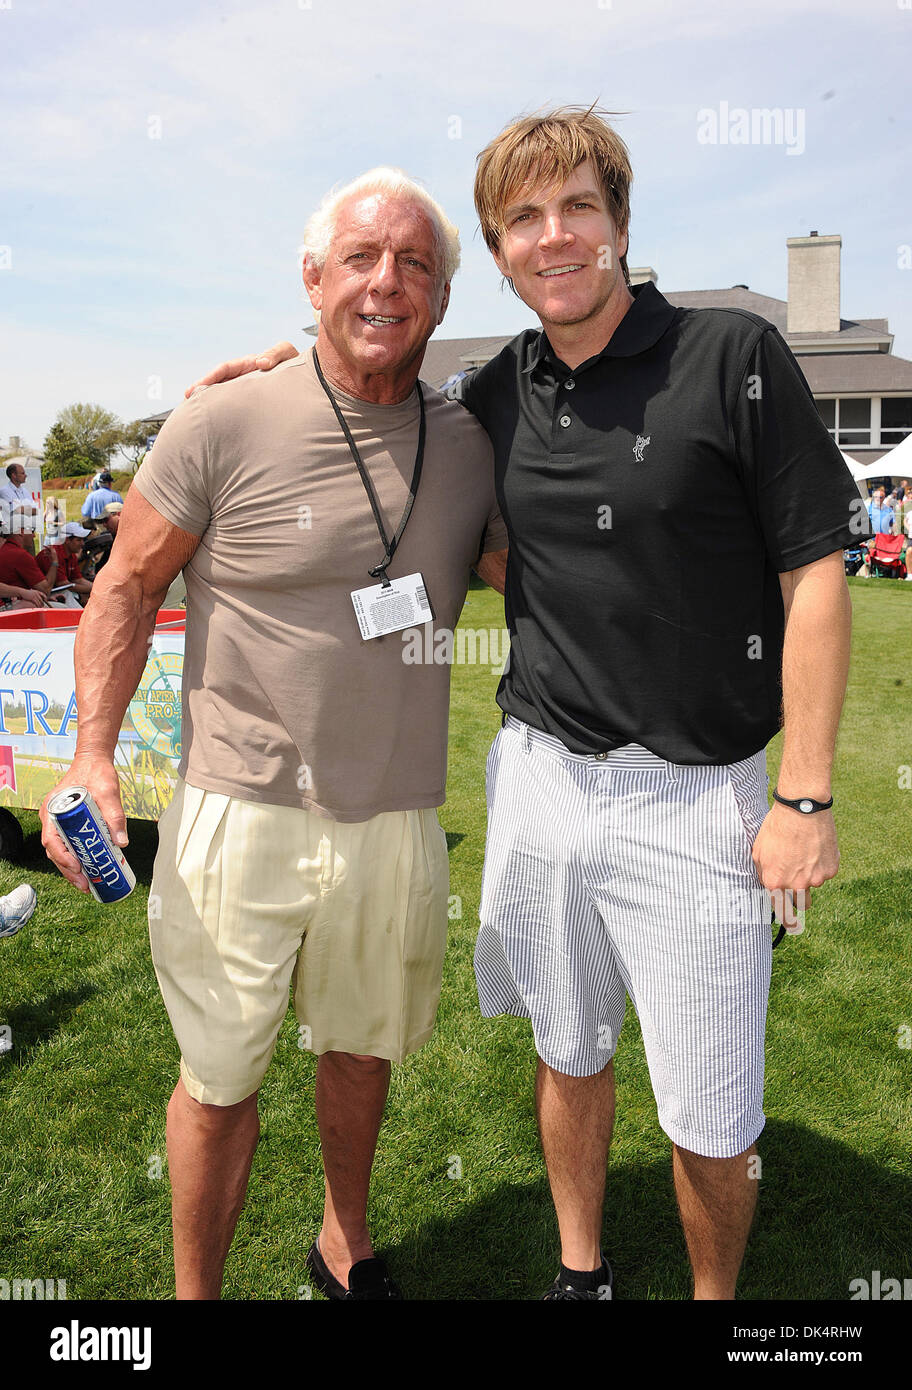 Apr 11, 2011 - Myrtle Beach, South Carolina; USA - Musician JACK INGRAM and Wrestler RIC FLAIR take a moment to pose for a picture as they  participates in the 17th Annual Monday After The Masters Celebrity Pro-Am Golf Tournament that took place at the Barefoot Landing Golf Resort located in Myrtle Beach.  Copyright 2011 Jason Moore. (Credit Image: © Jason Moore/ZUMAPRESS.com) Stock Photo